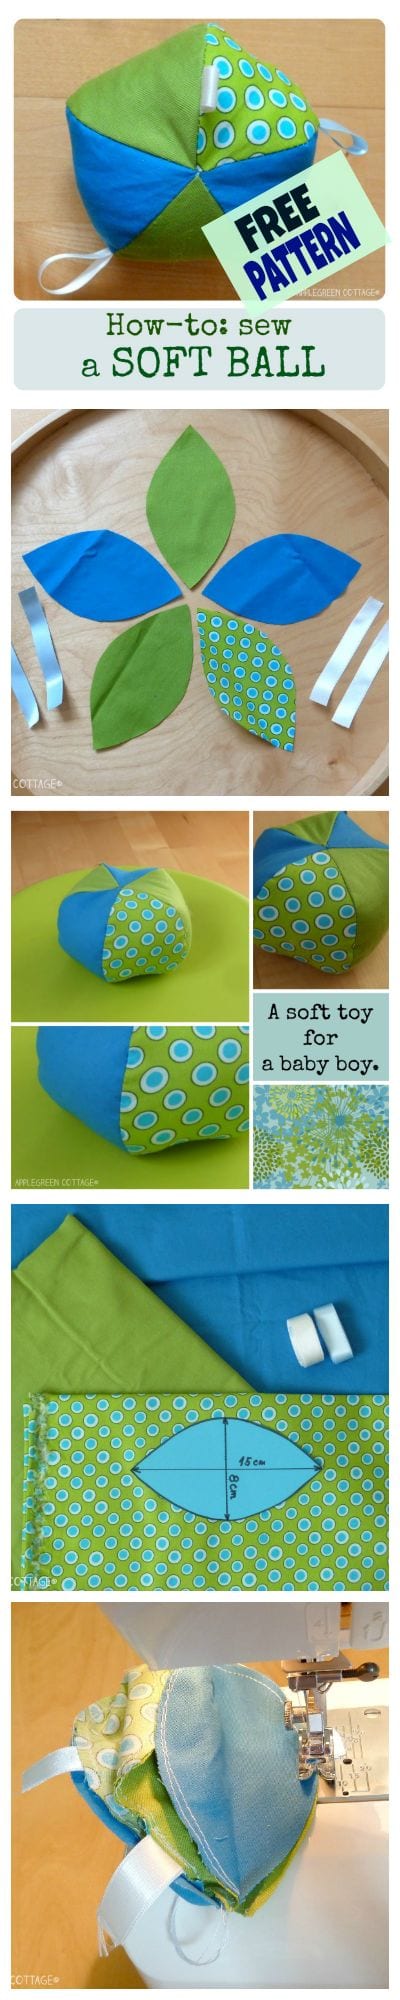 Soft ball sewing tutorial